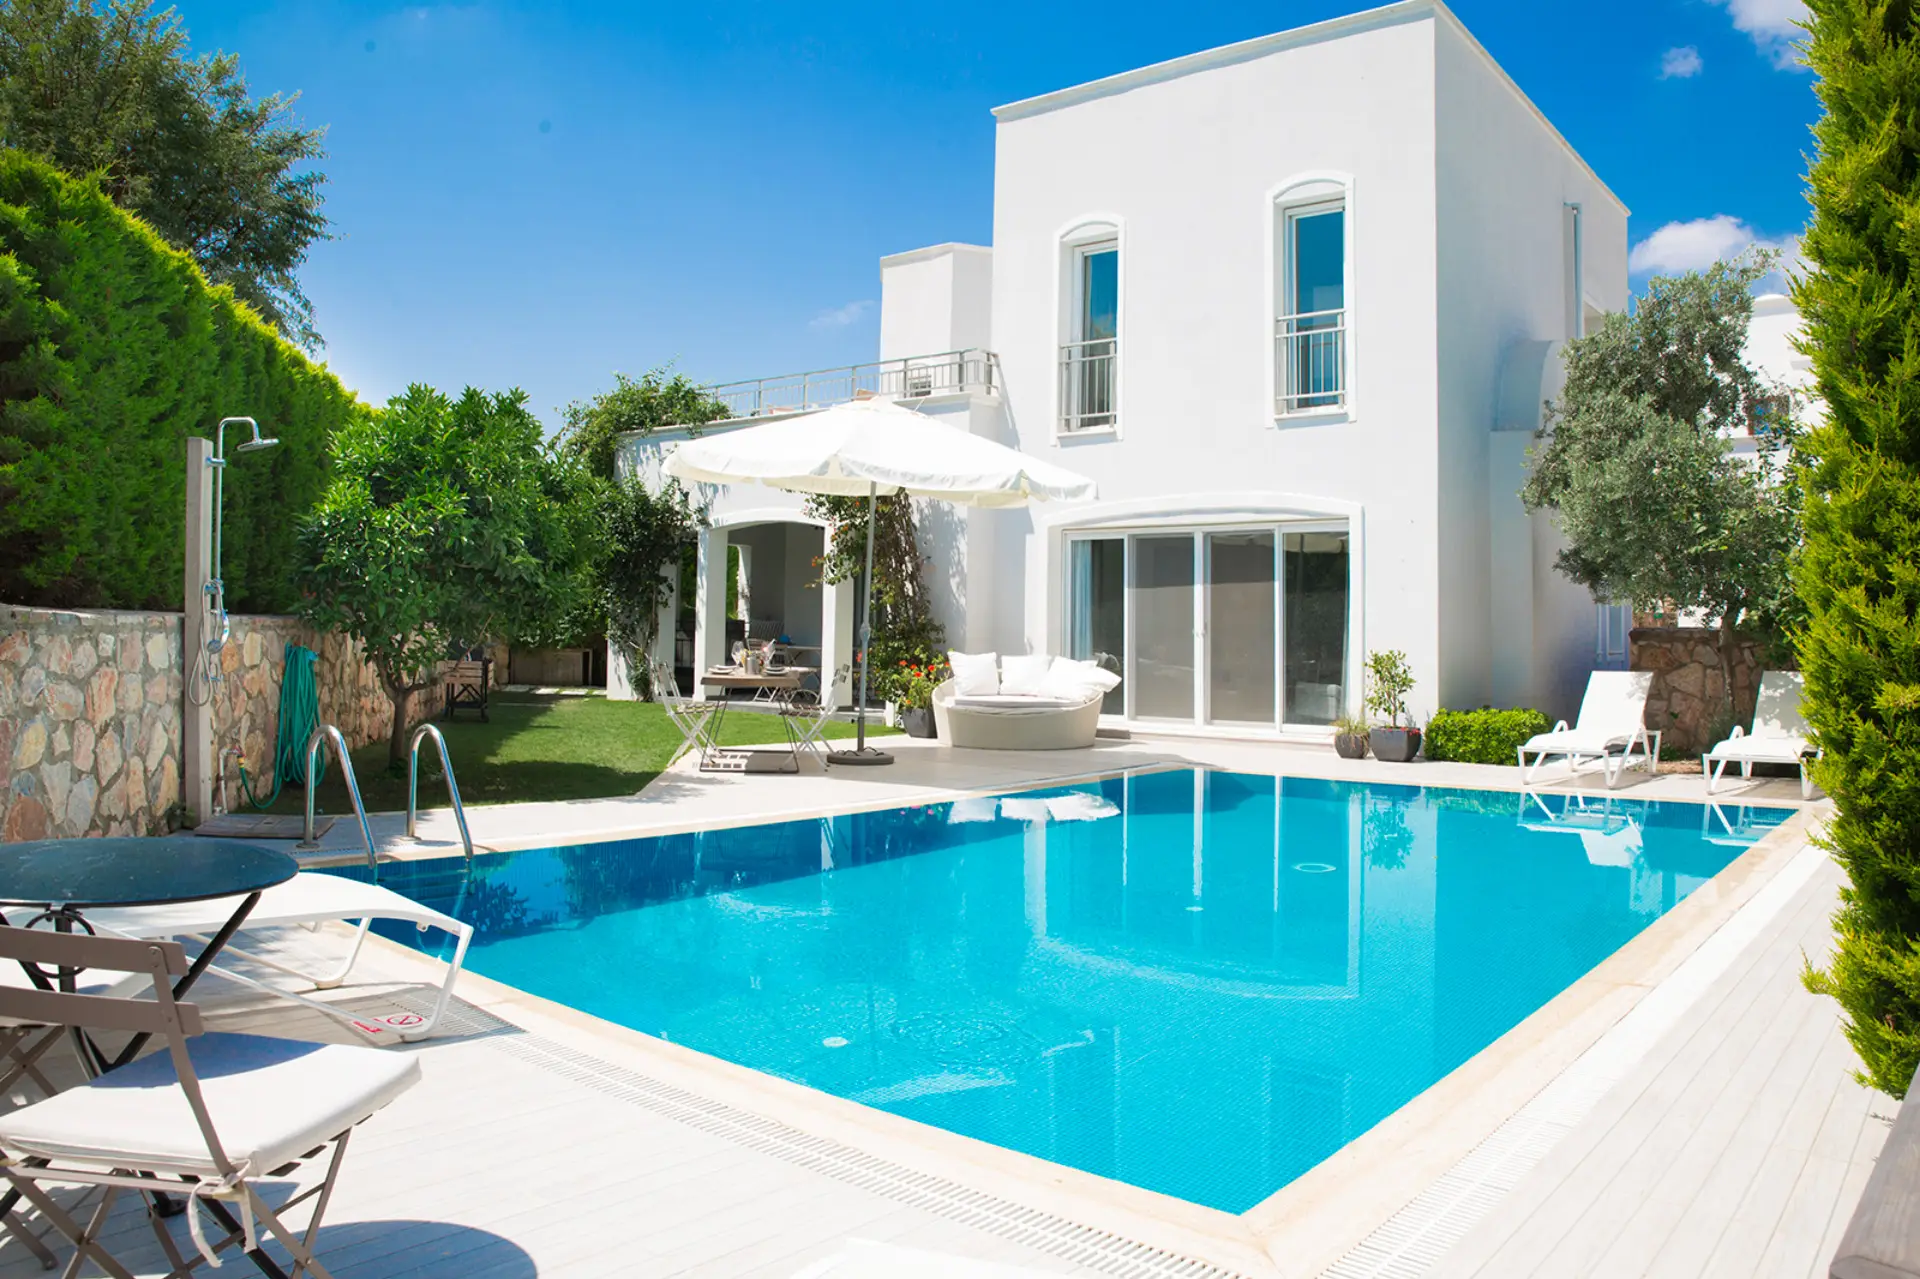 Rent a House or Villa, Experience Your Holiday with the Comfort of Home!